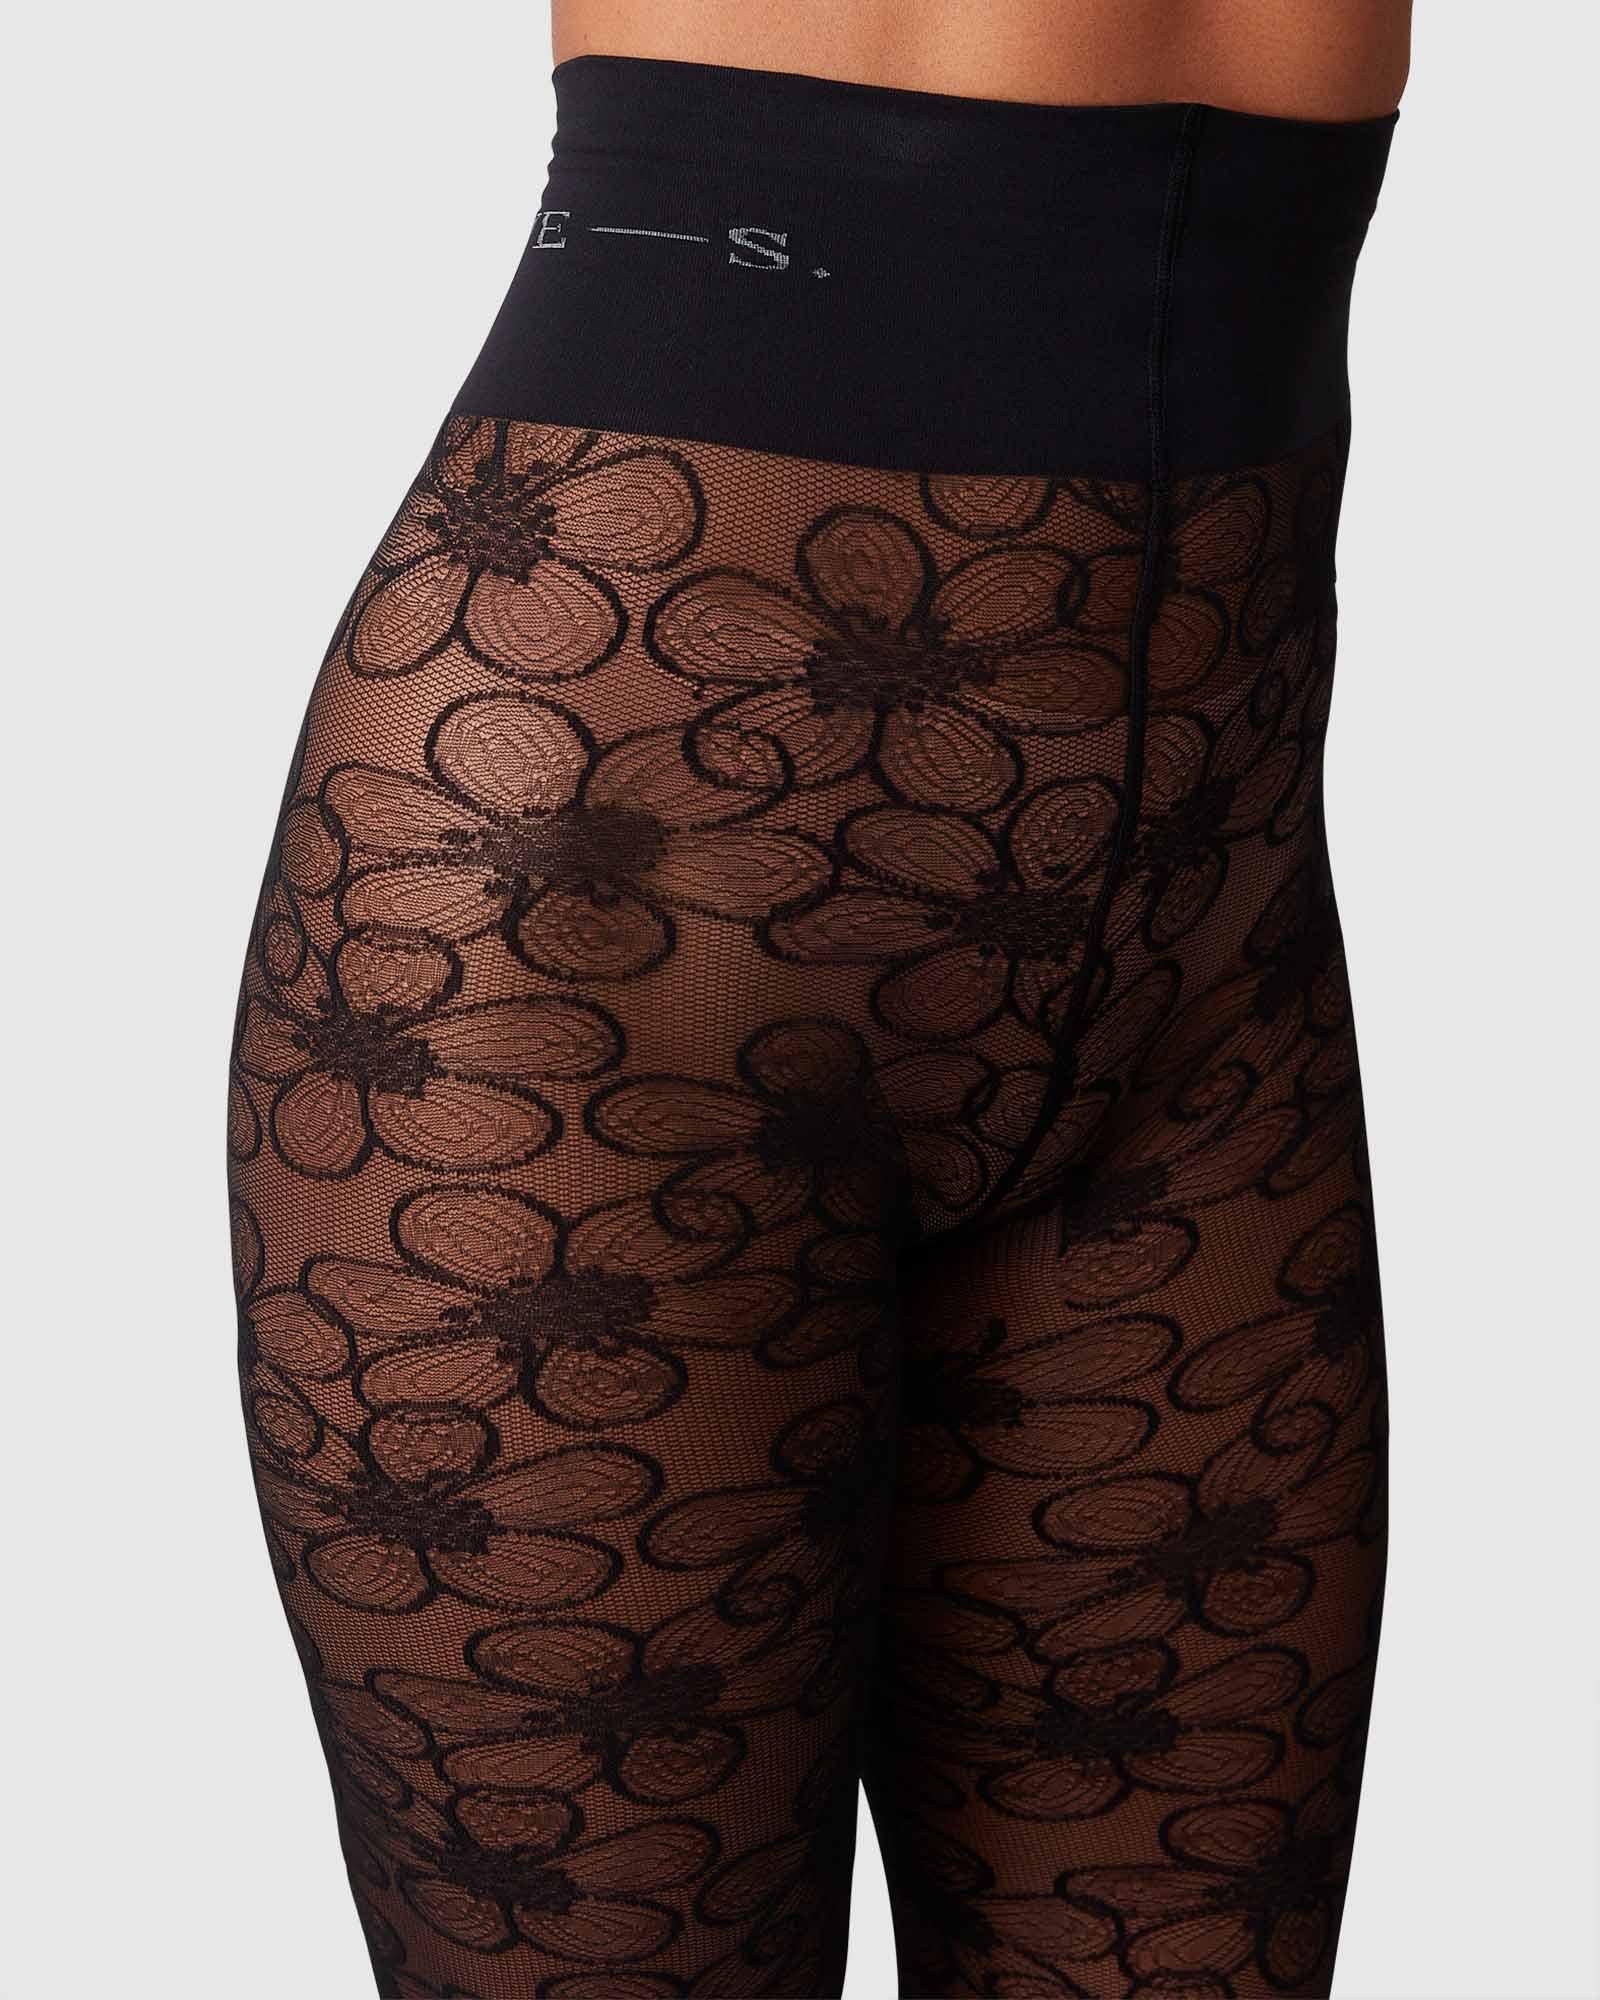 Buy Softwear Womens White Lace Leggings at